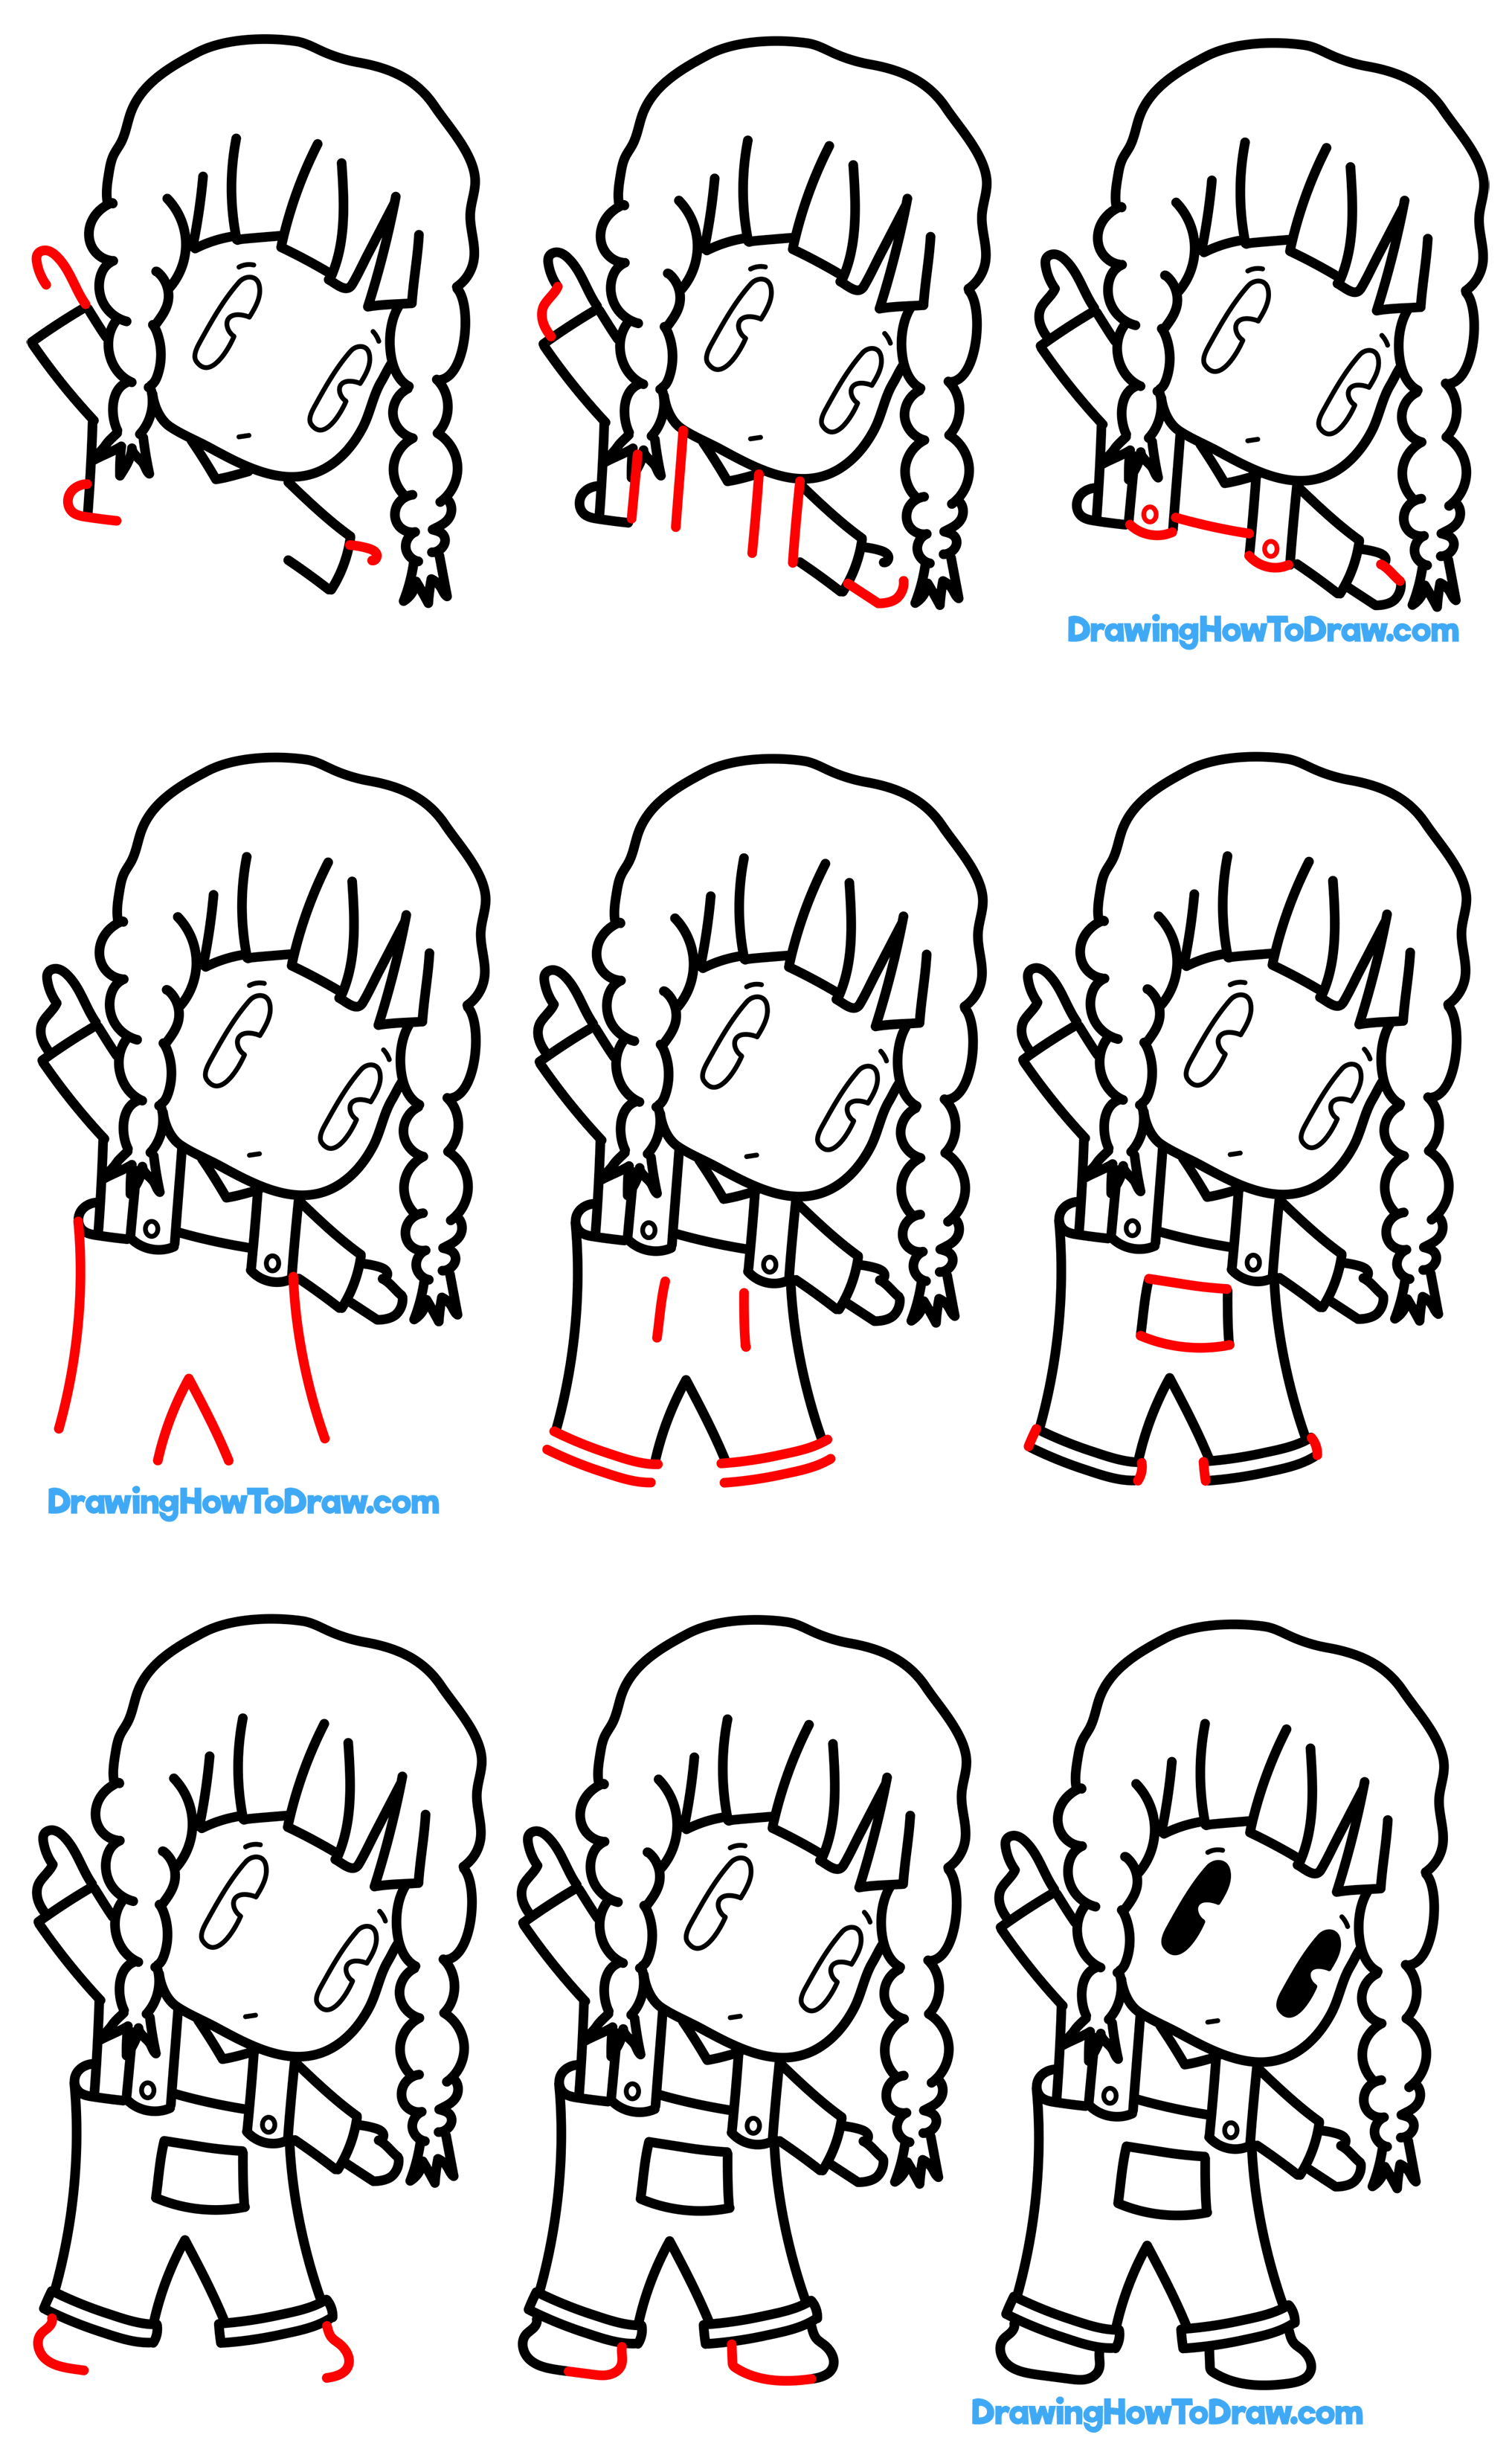 Learn How to Draw a Cute Chibi Kawaii Girl in Overalls Easy Step-by-Step Drawing Tutorial for Kids